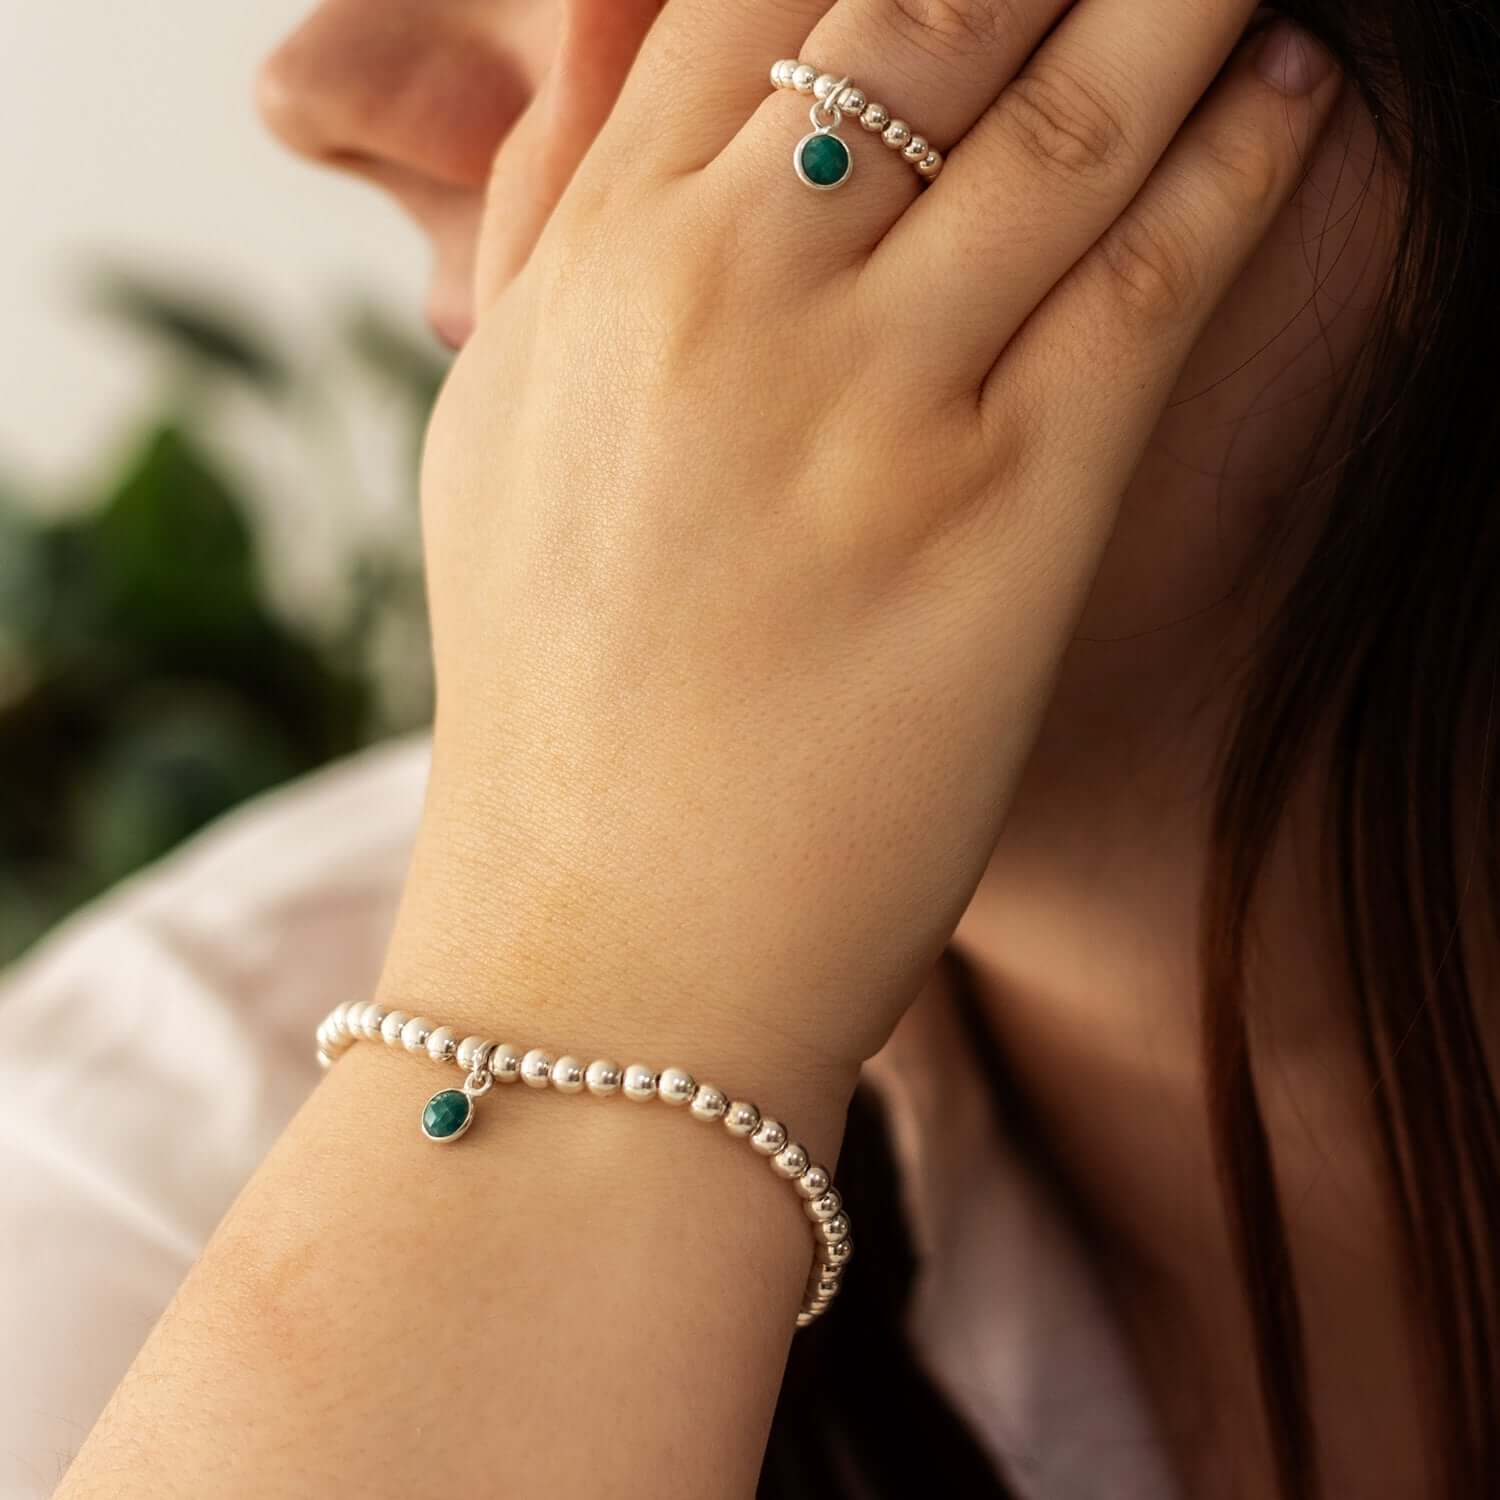 A close-up of a woman's hand resting on her cheek, showcasing May birthstone jewelry. She is wearing a silver beaded bracelet with a small green gemstone charm and a matching ring with a green stone. The background is softly blurred with hints of greenery